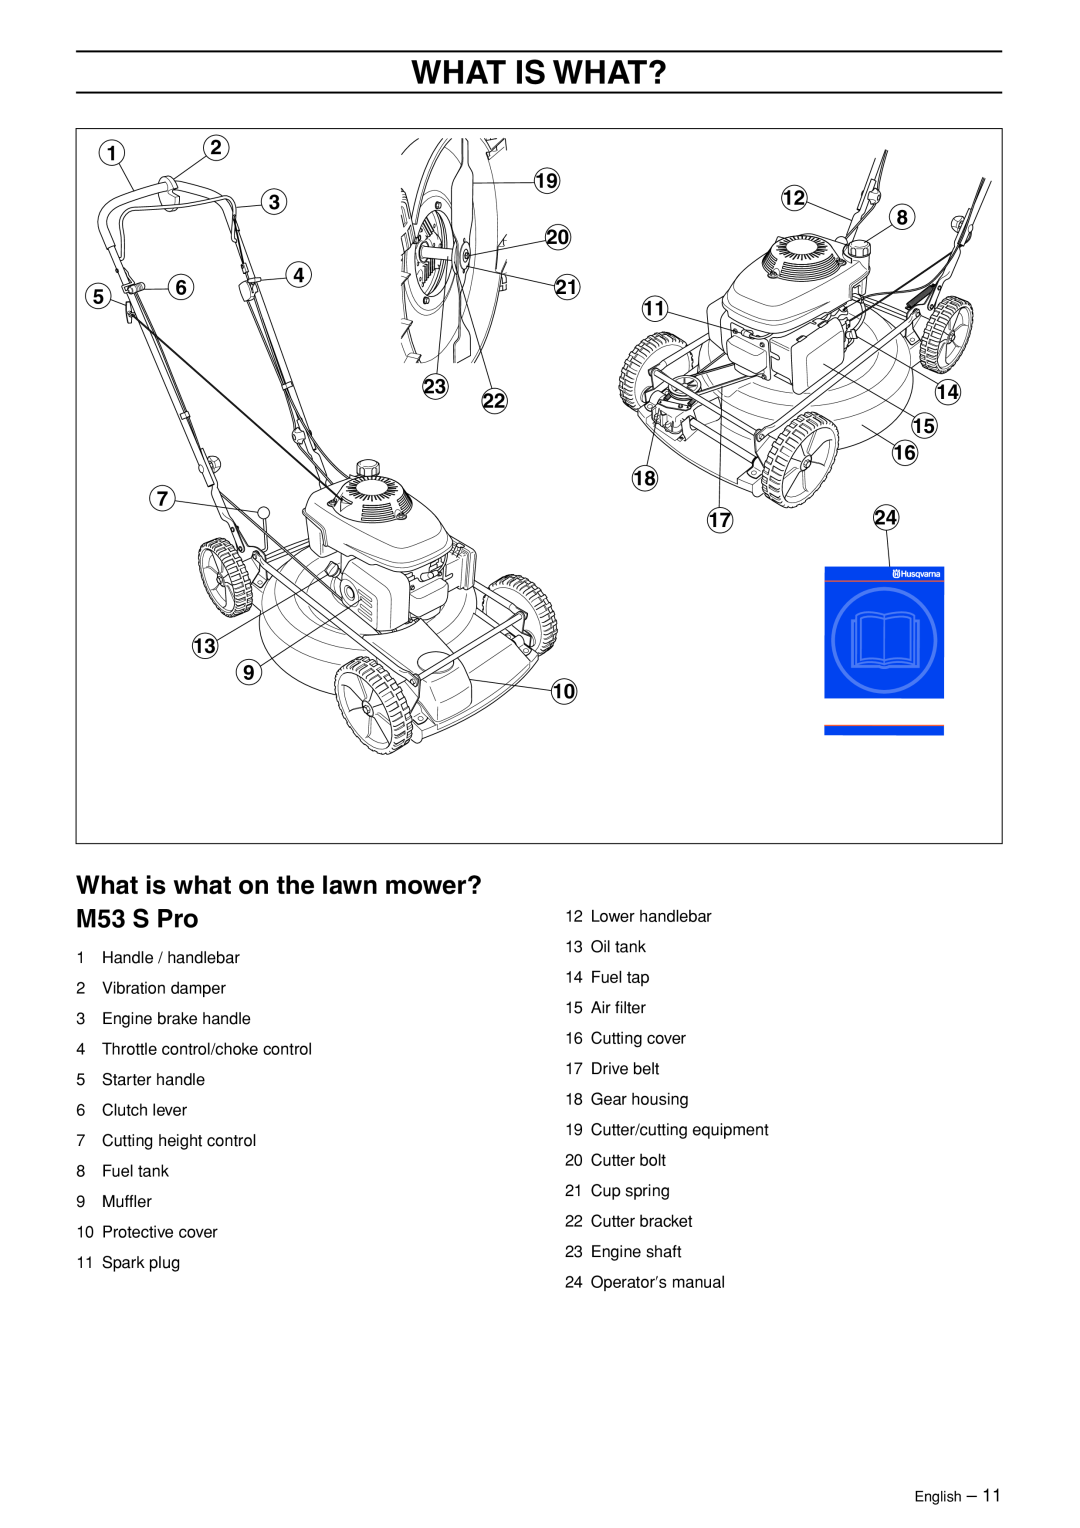 Husqvarna M48 Pro, M53 S Pro manual What Is What?, What is what on the lawn mower? 